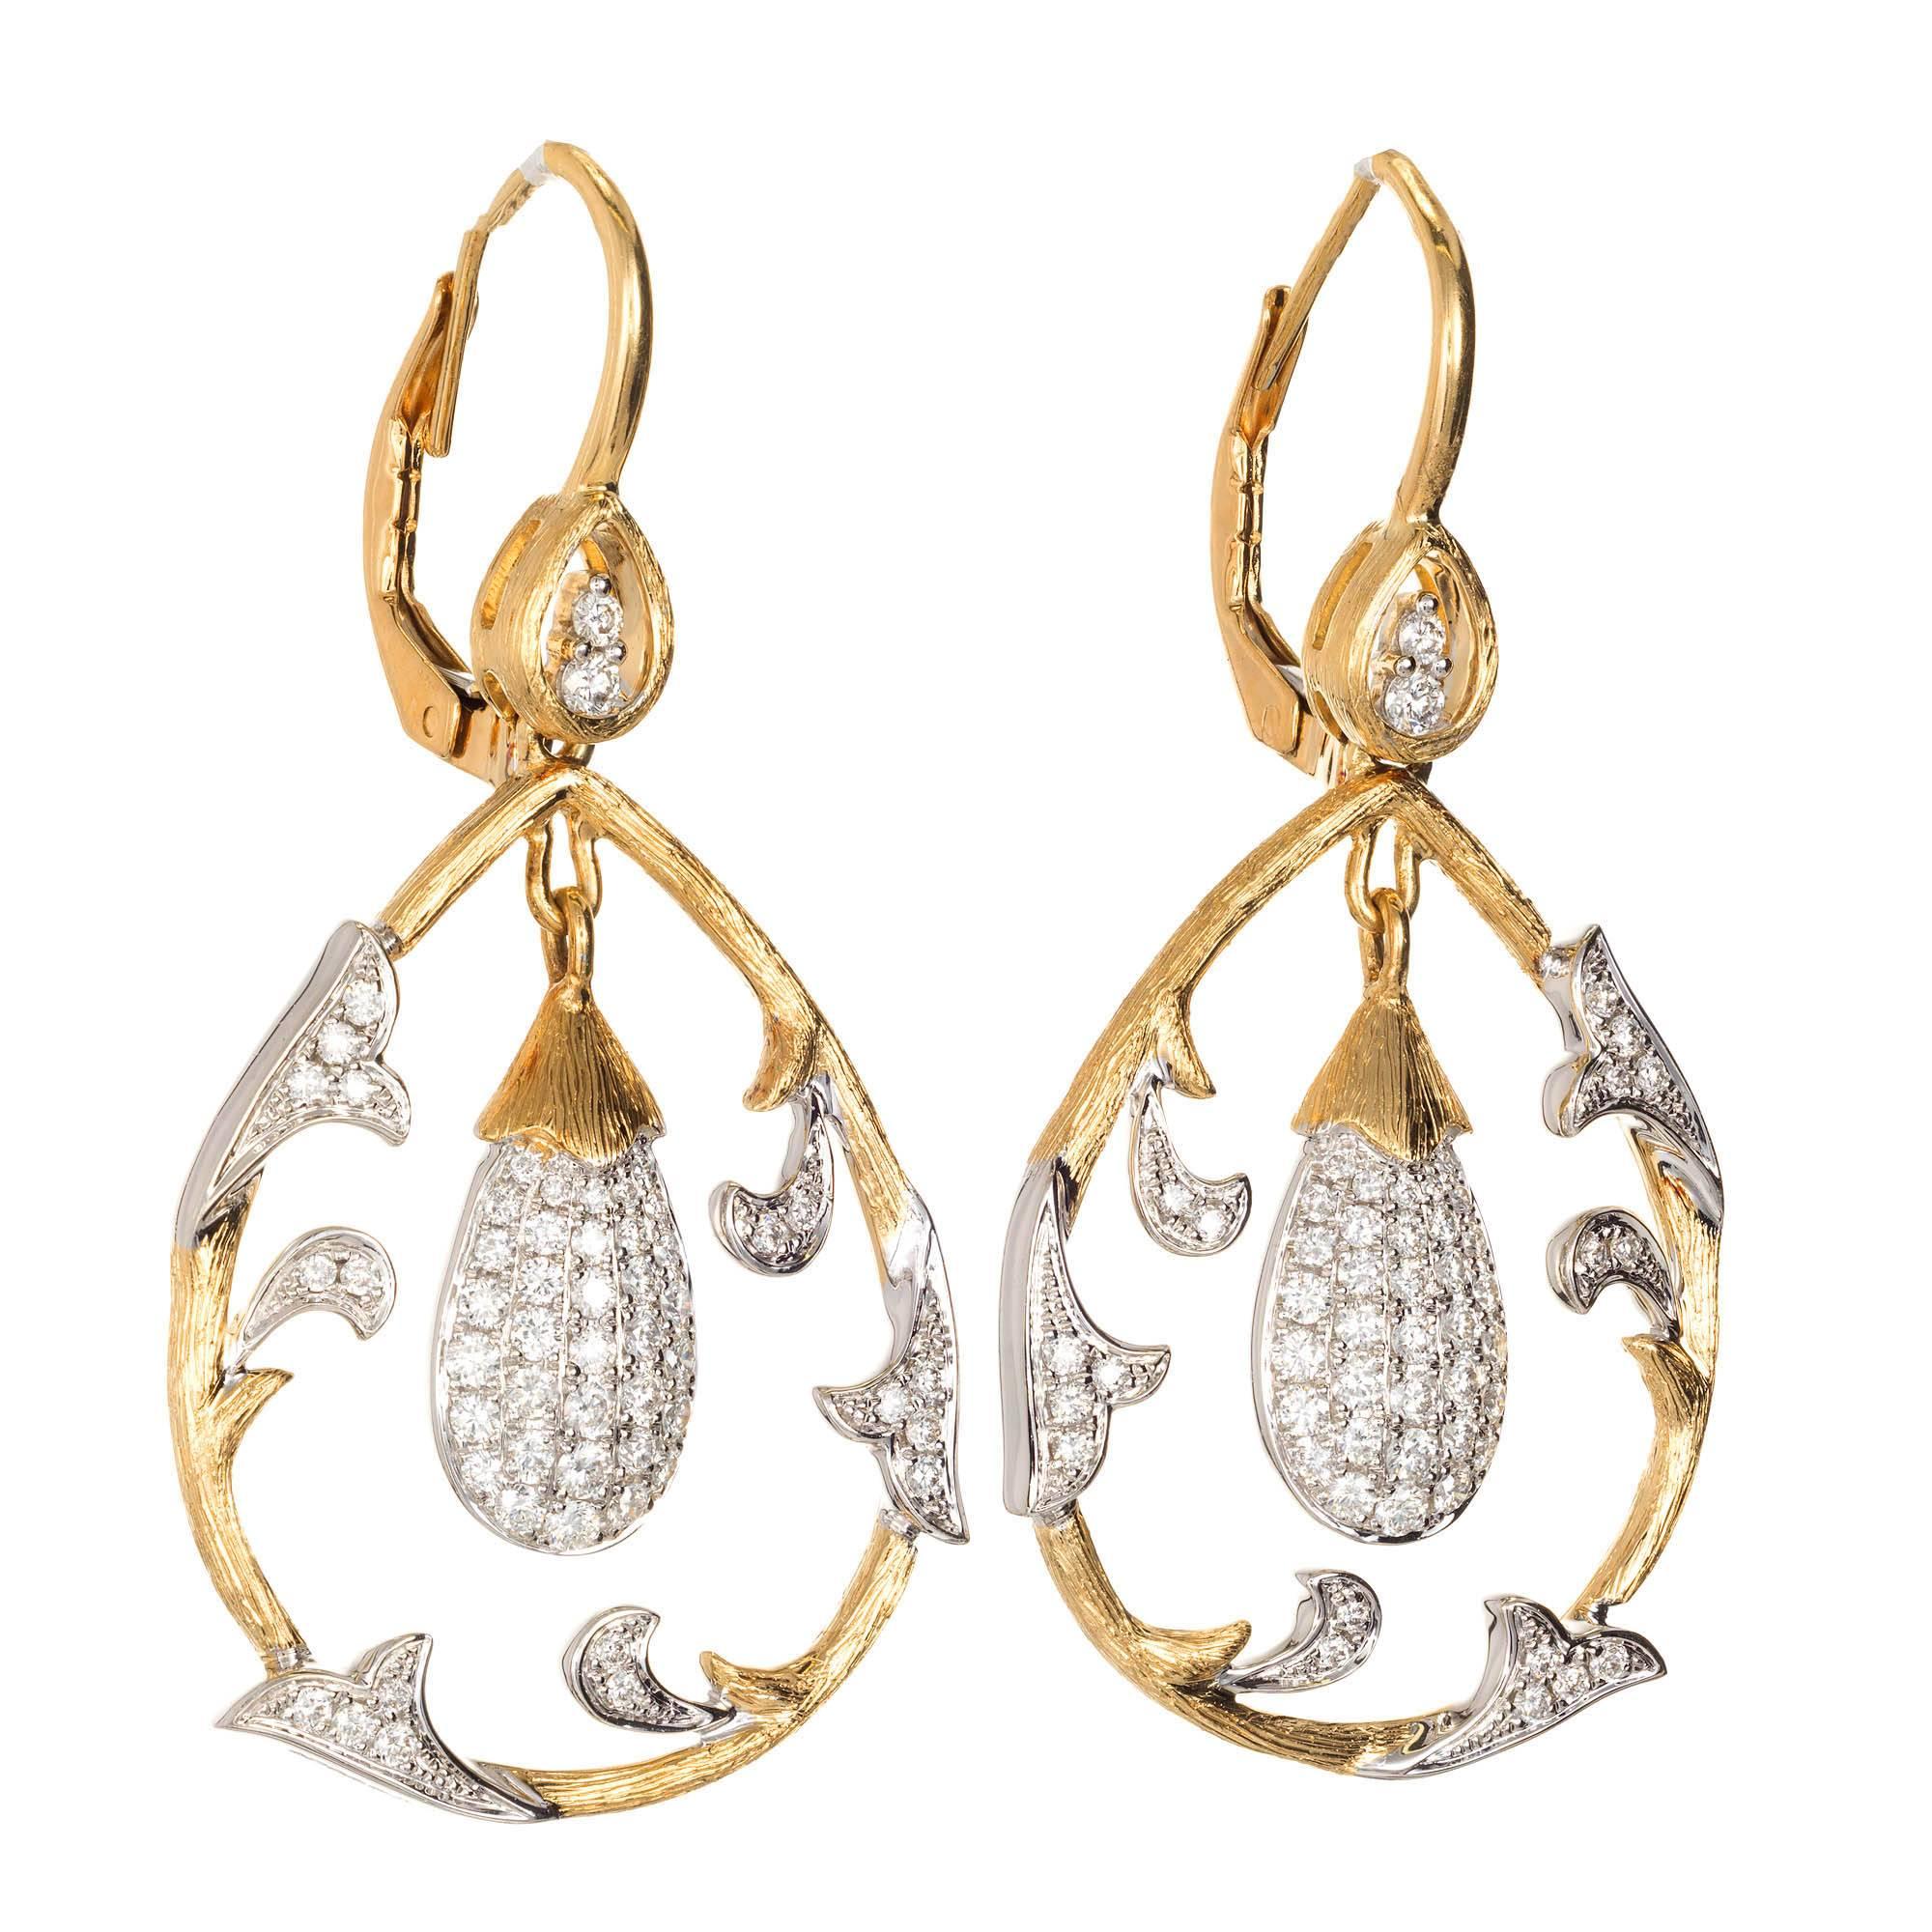 Cordova 1980’s diamond dangle chandelier earrings. 18k yellow and white gold with Euro wire tops.

110 round full cut diamonds, approx. total weight .75cts, F, VS
18k yellow and white gold
Tested: 18k
Stamped: K18
11.9 grams
Top to bottom: 42.76mm